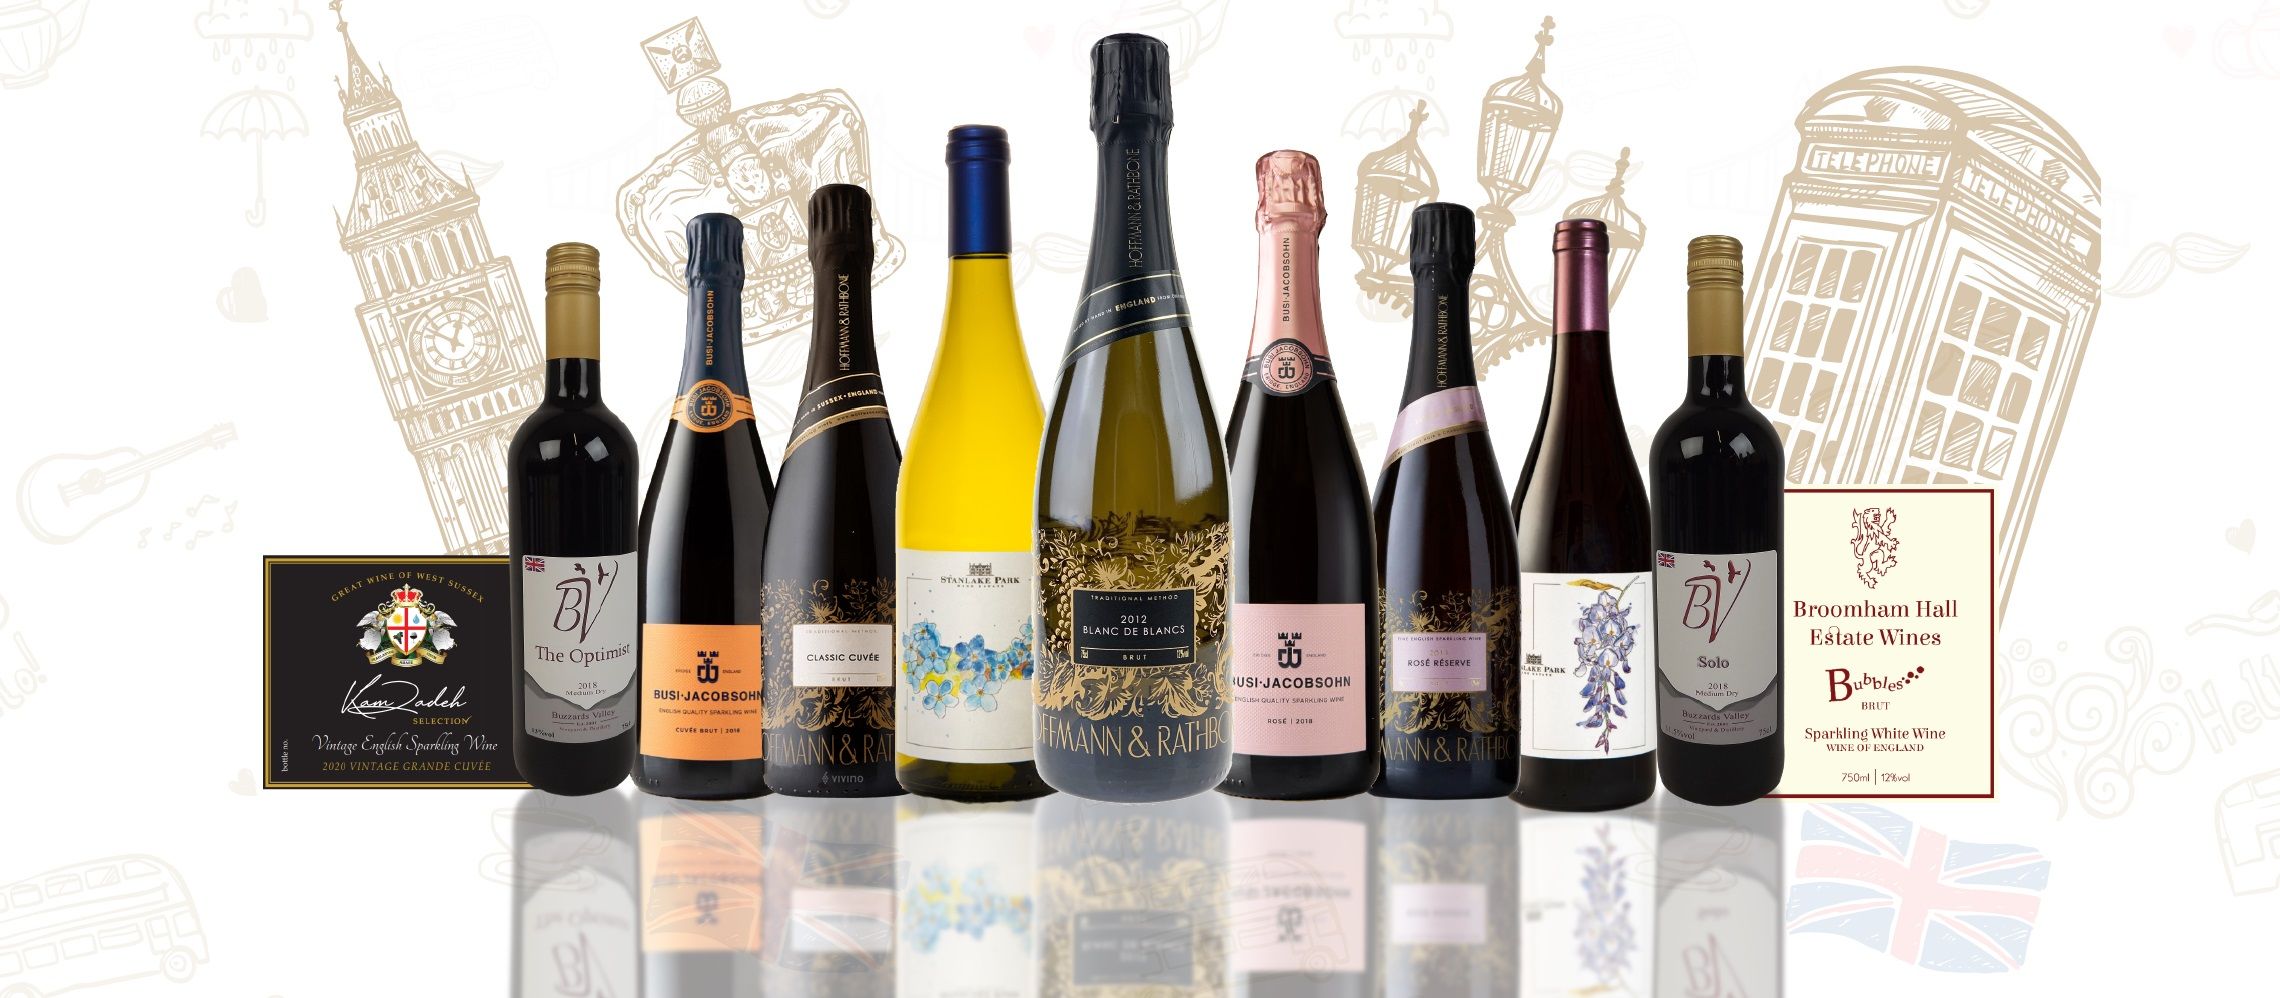 Photo for: 11 Best British Wines To Buy Now